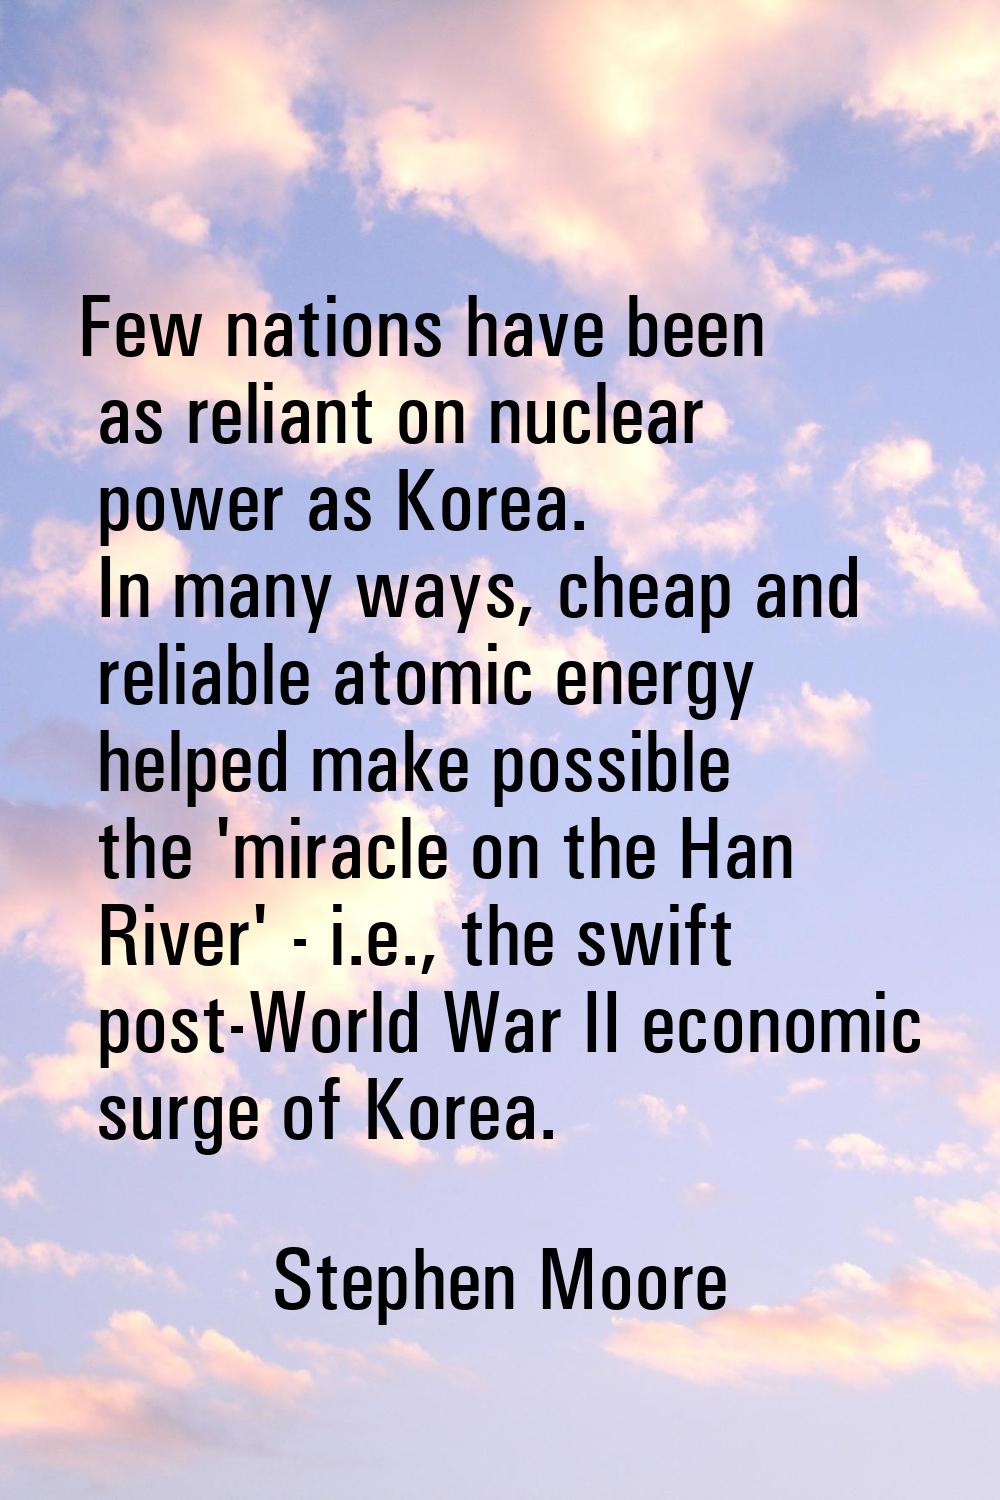 Few nations have been as reliant on nuclear power as Korea. In many ways, cheap and reliable atomic